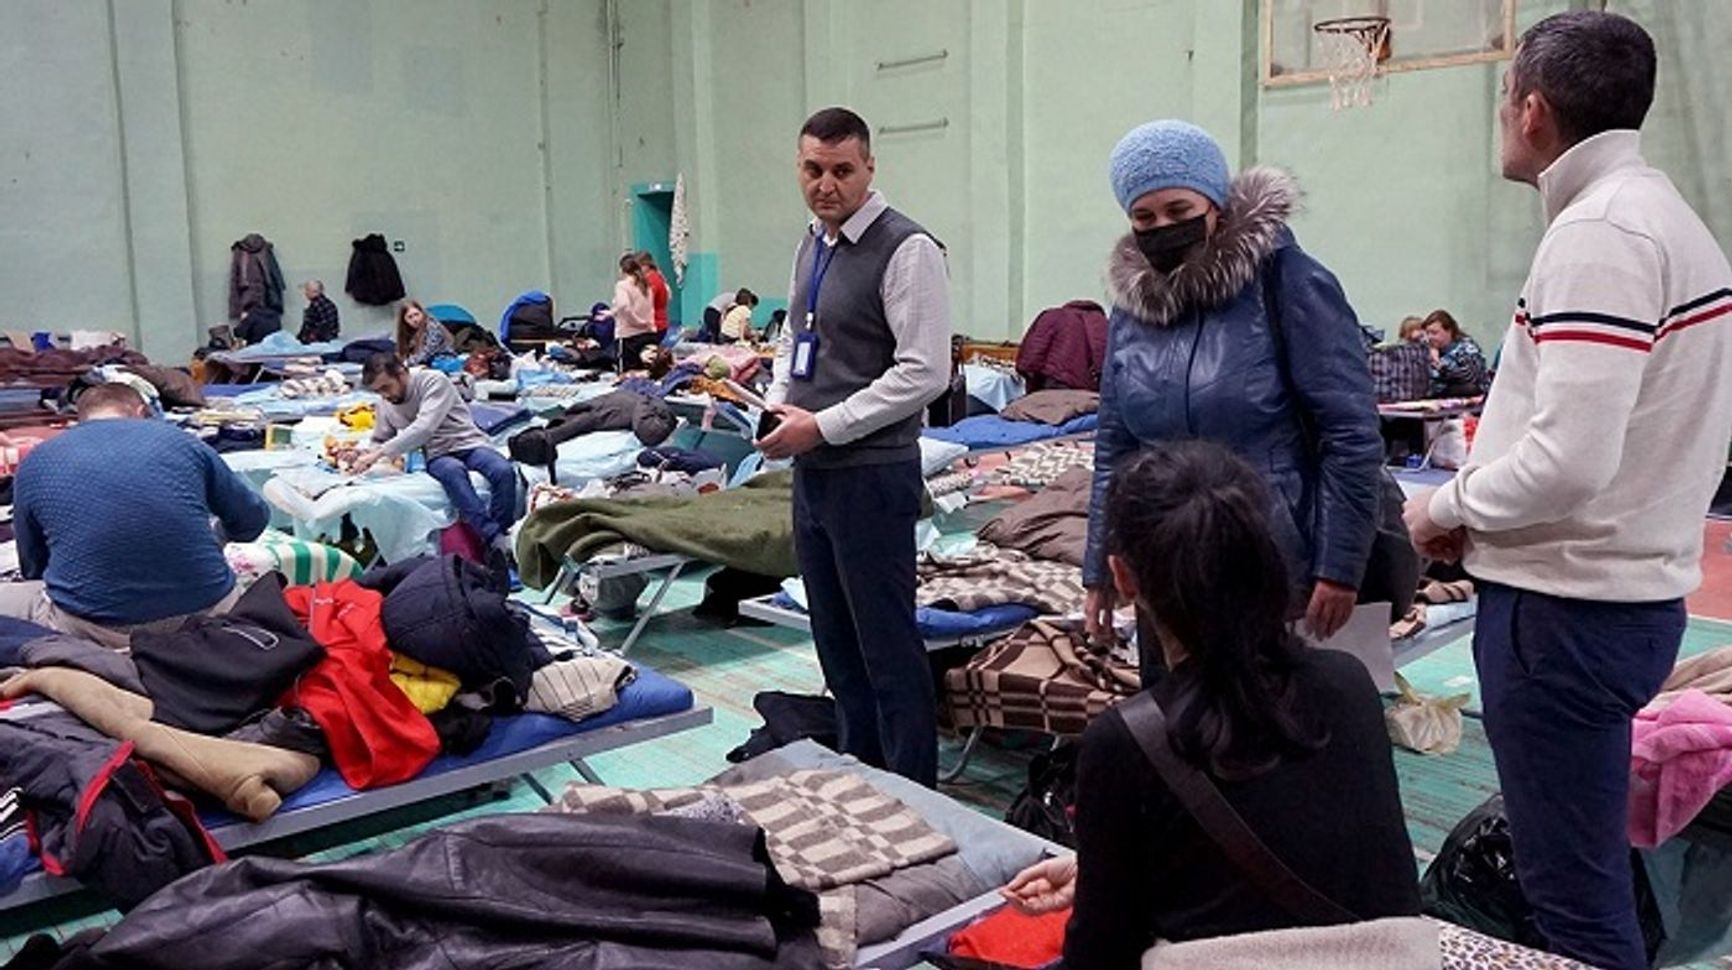 Temporary accommodation center for refugees in the Rostov region